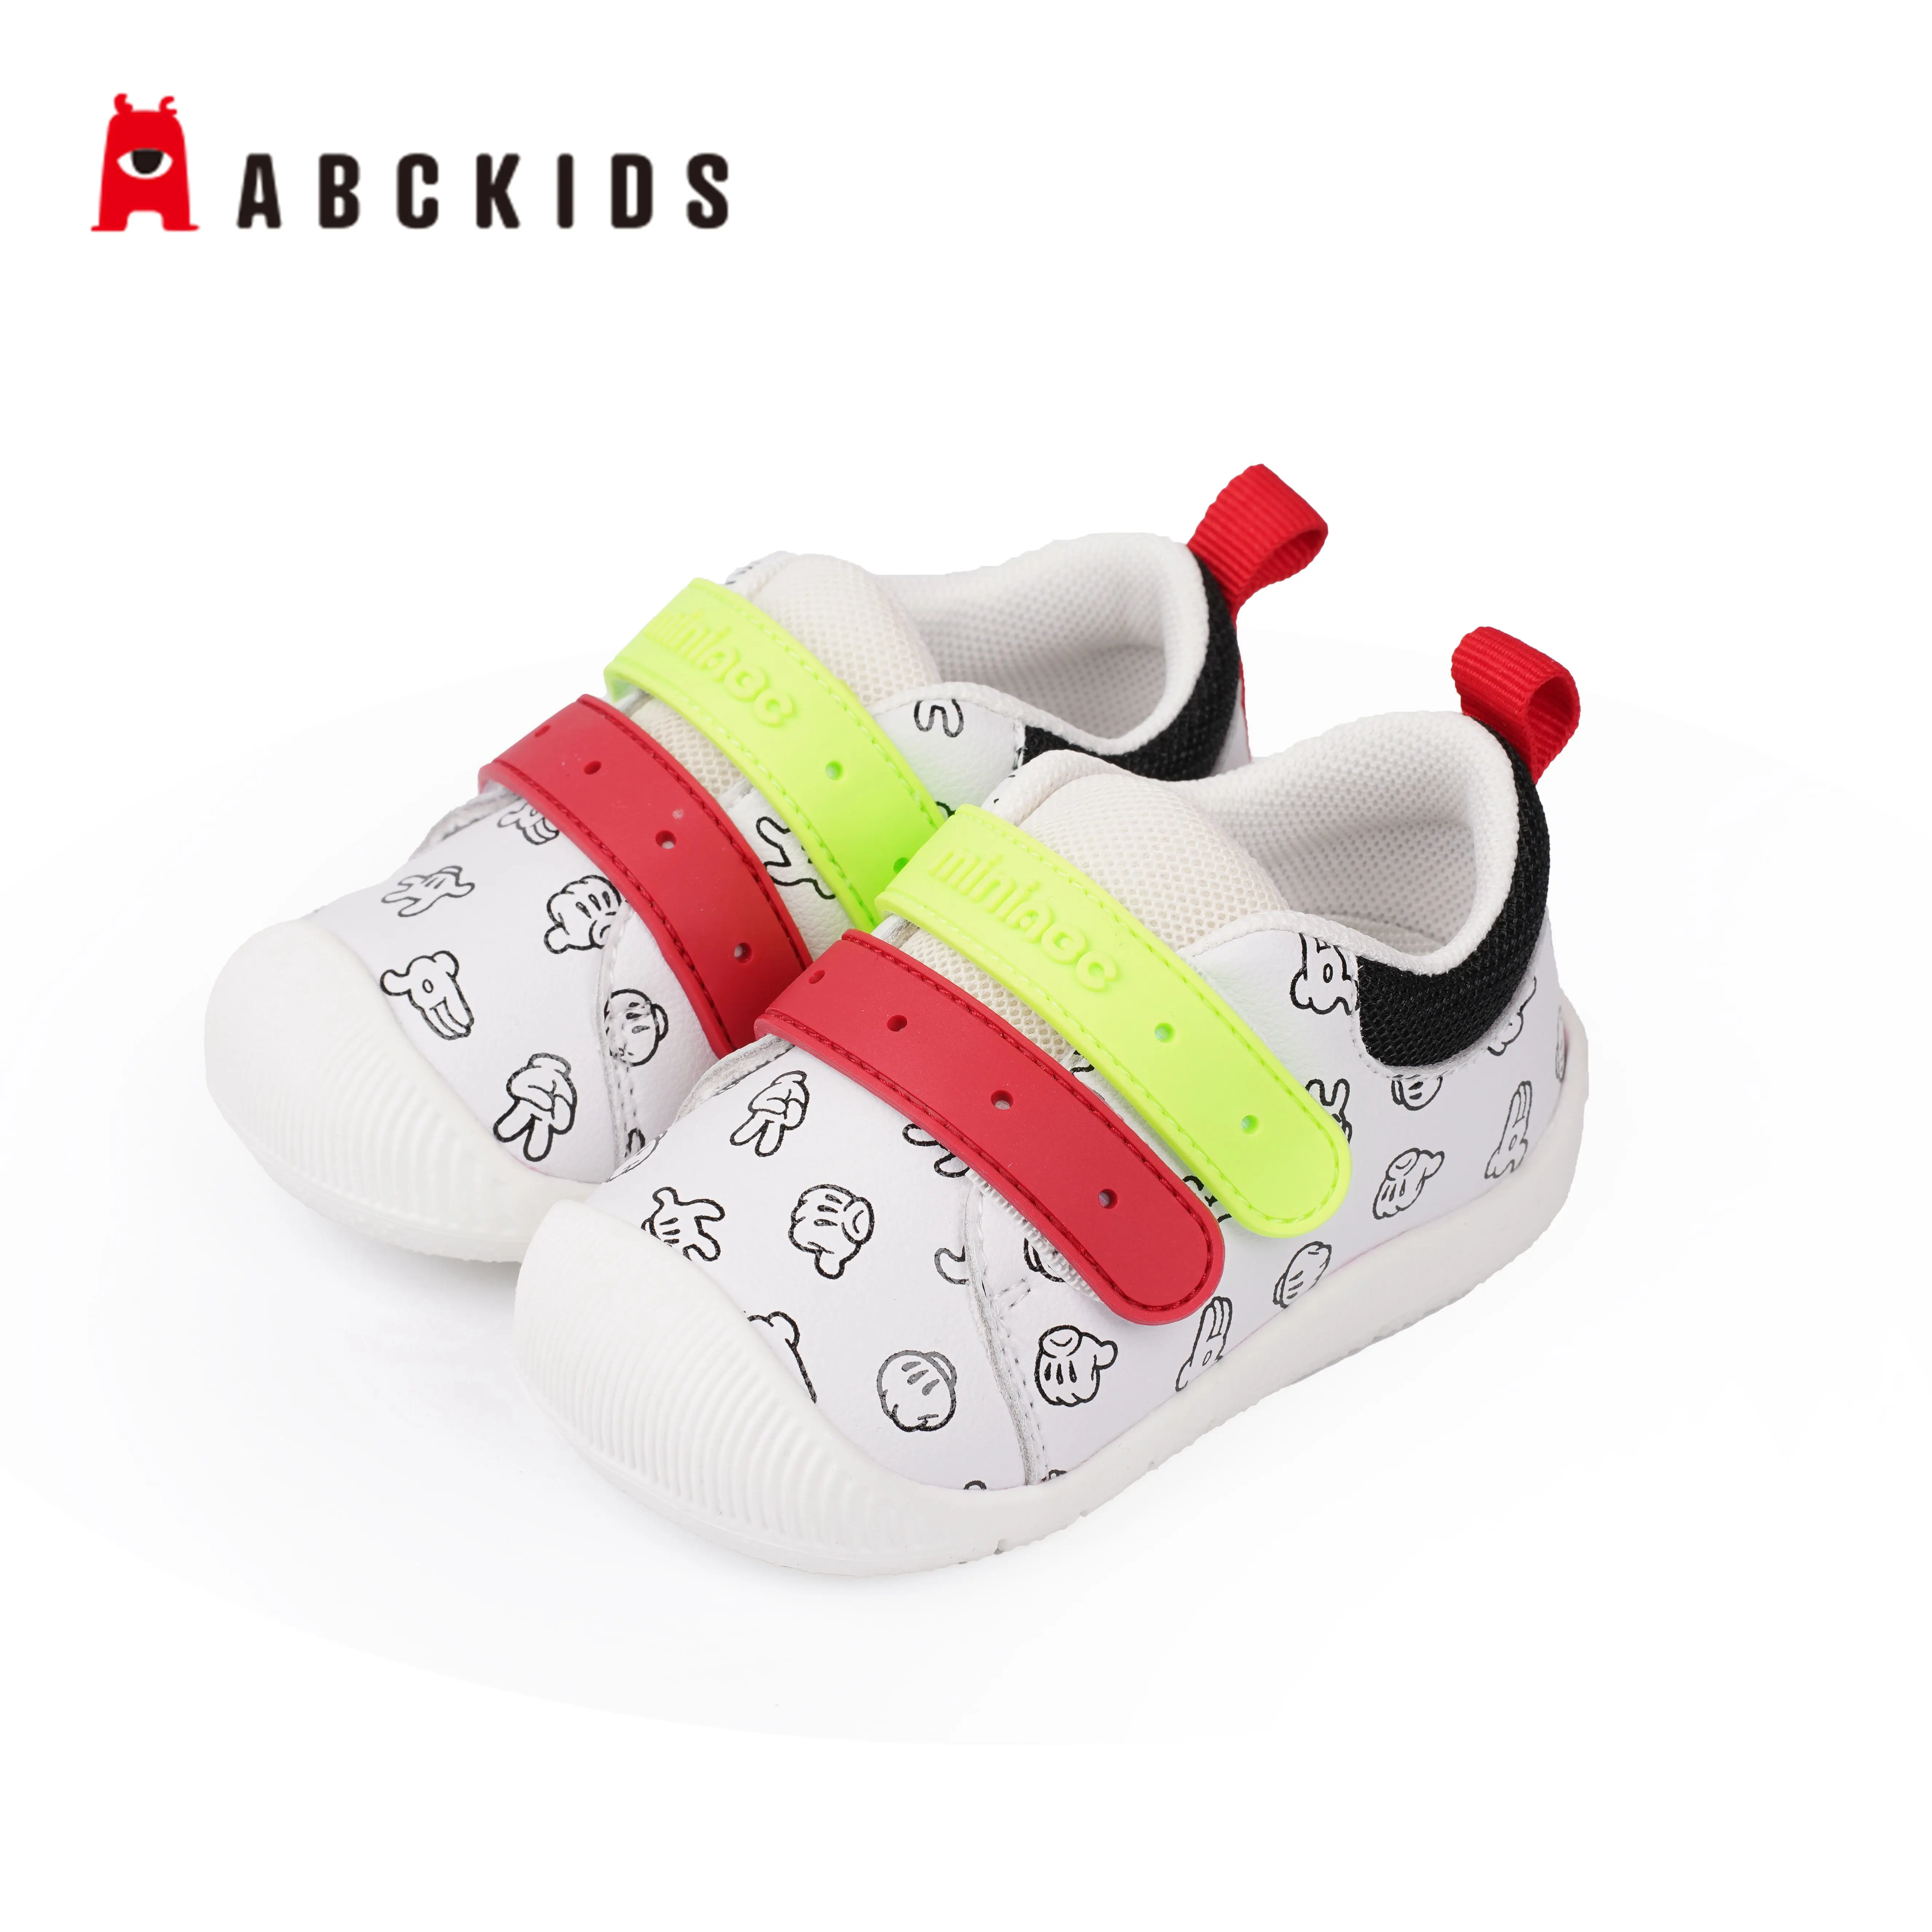 ABC KIDS High Quality Comfortable Baby Designers Walking Pretty Casual Shoes